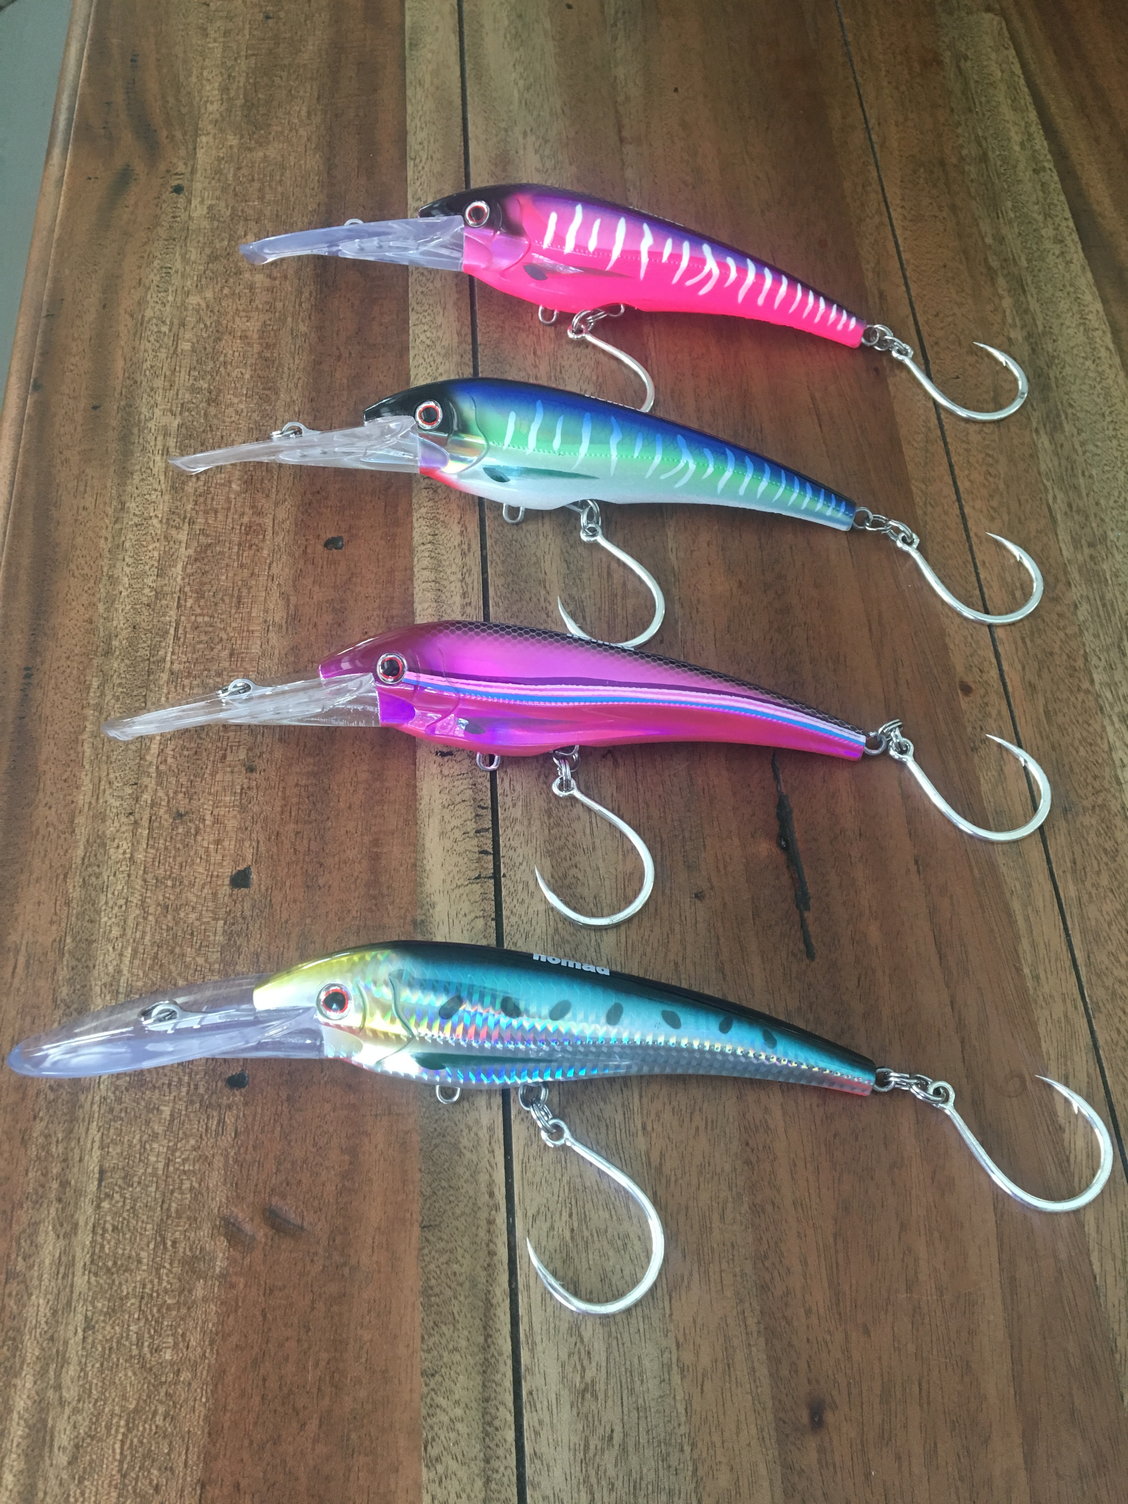 Nomad DTX Minnow review - The Hull Truth - Boating and Fishing Forum